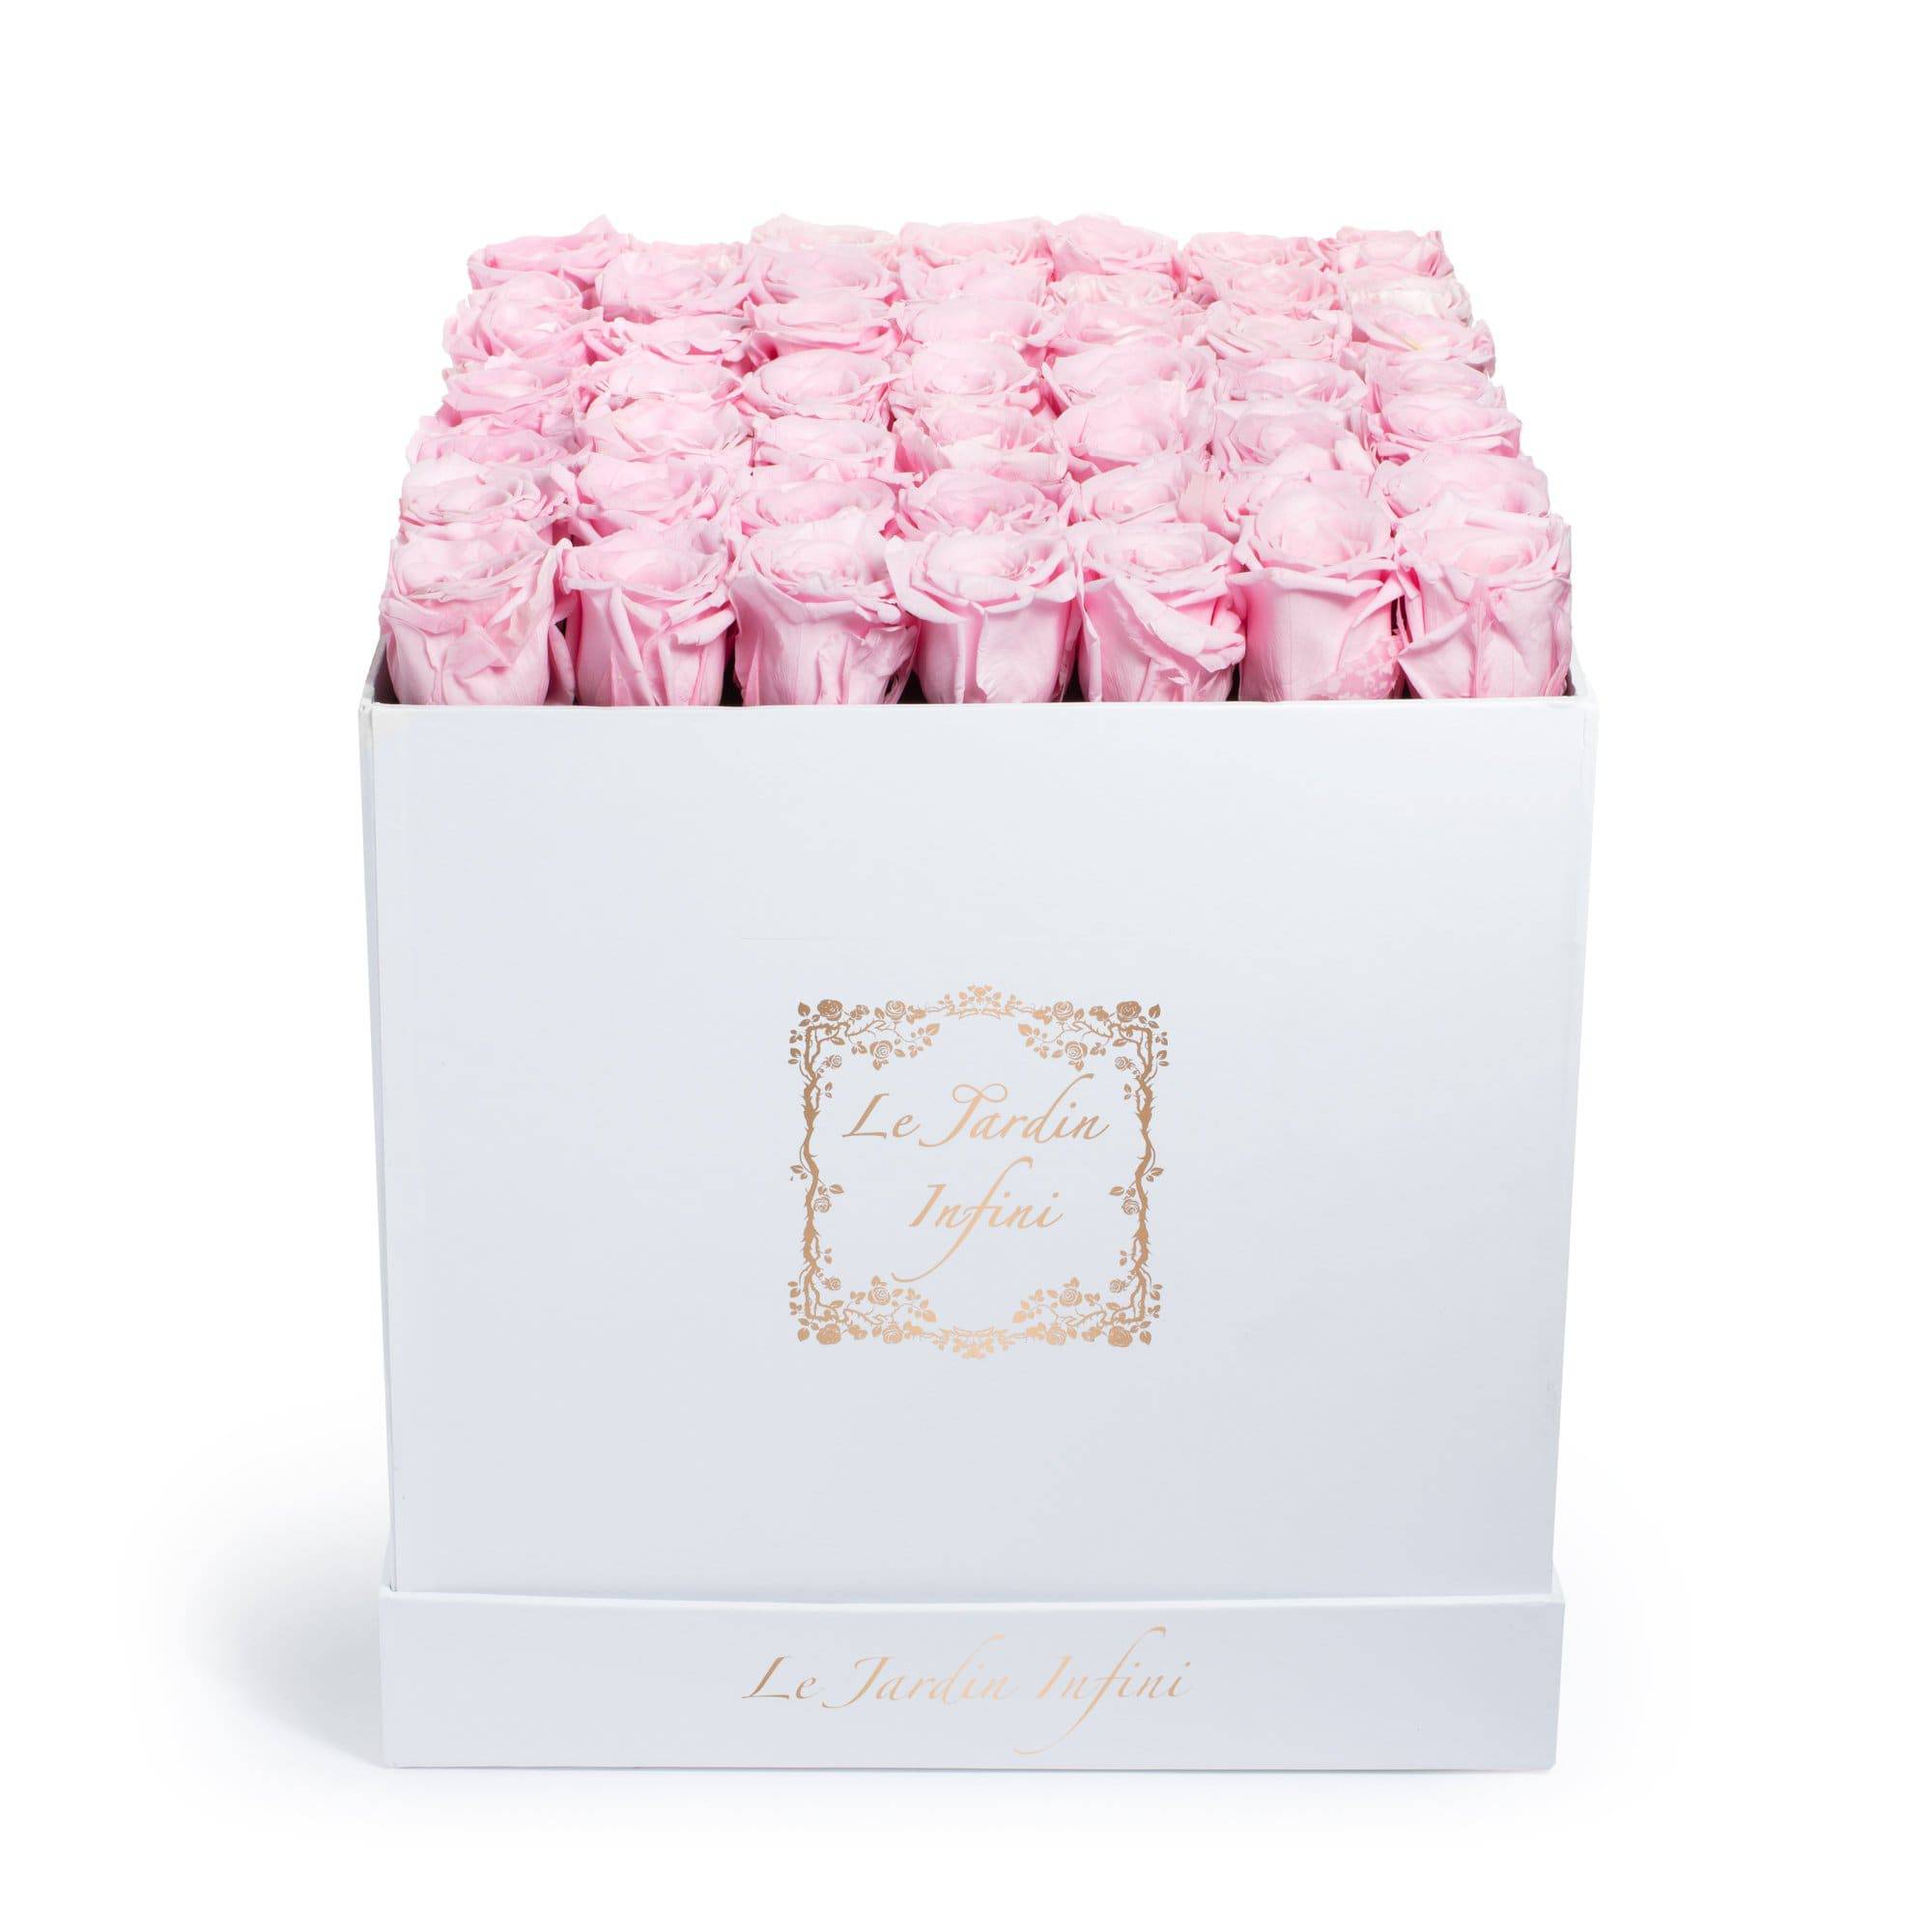 Soft Pink Preserved Roses - Large Square White Box - Le Jardin Infini Roses in a Box